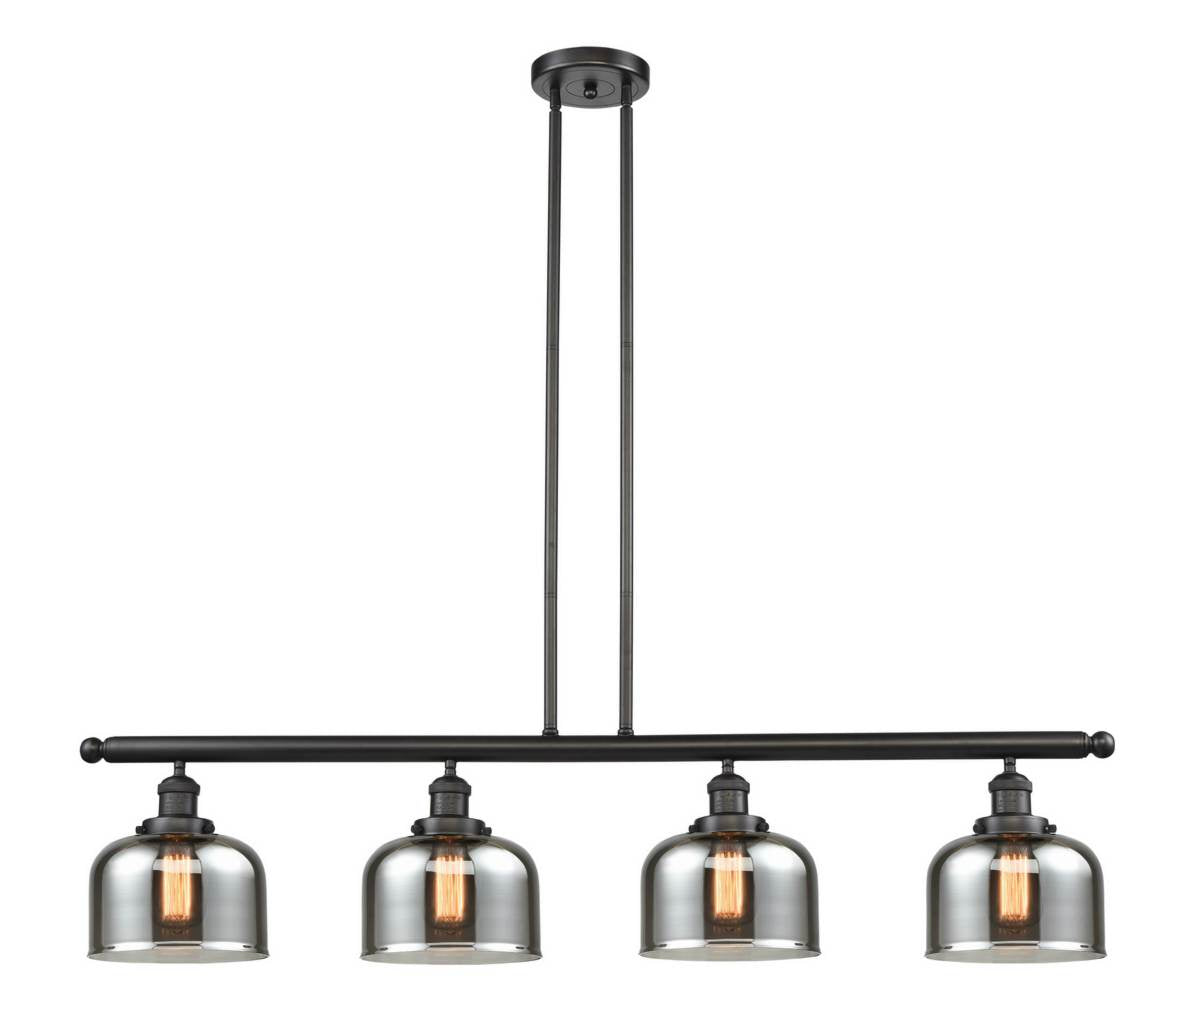 214-OB-G73 4-Light 52.625" Oil Rubbed Bronze Island Light - Plated Smoke Large Bell Glass - LED Bulb - Dimmensions: 52.625 x 8 x 10<br>Minimum Height : 20<br>Maximum Height : 44 - Sloped Ceiling Compatible: Yes